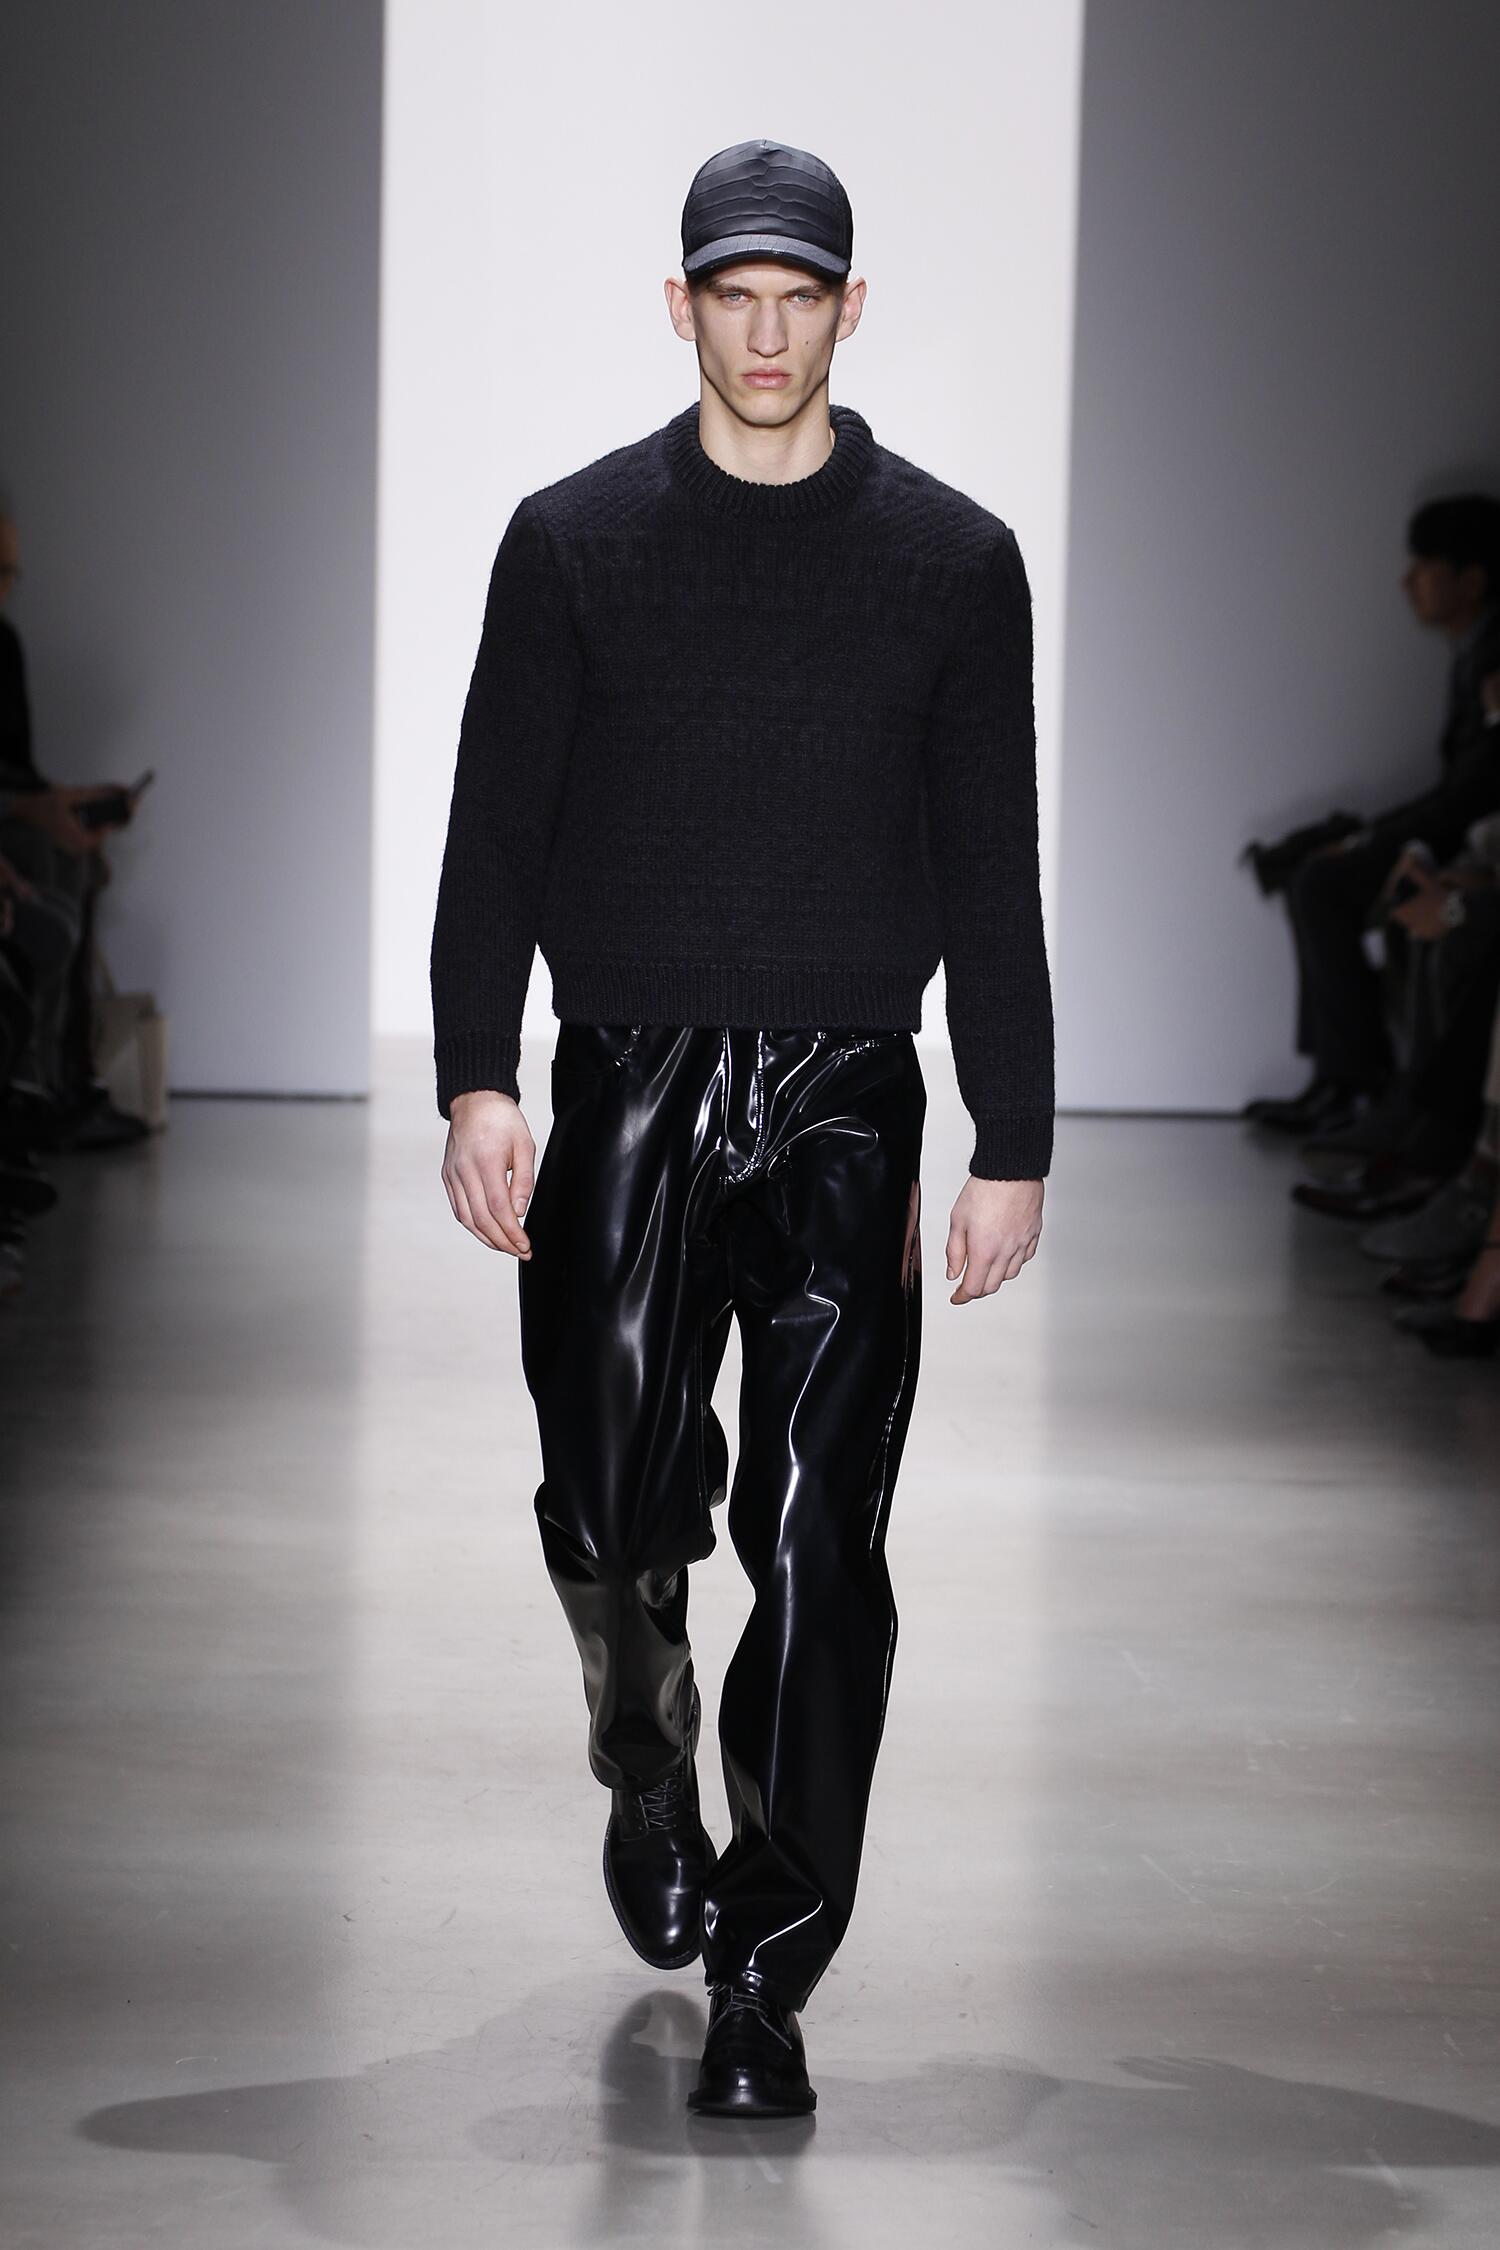 CALVIN KLEIN COLLECTION MEN’S FALL 2015 | The Skinny Beep